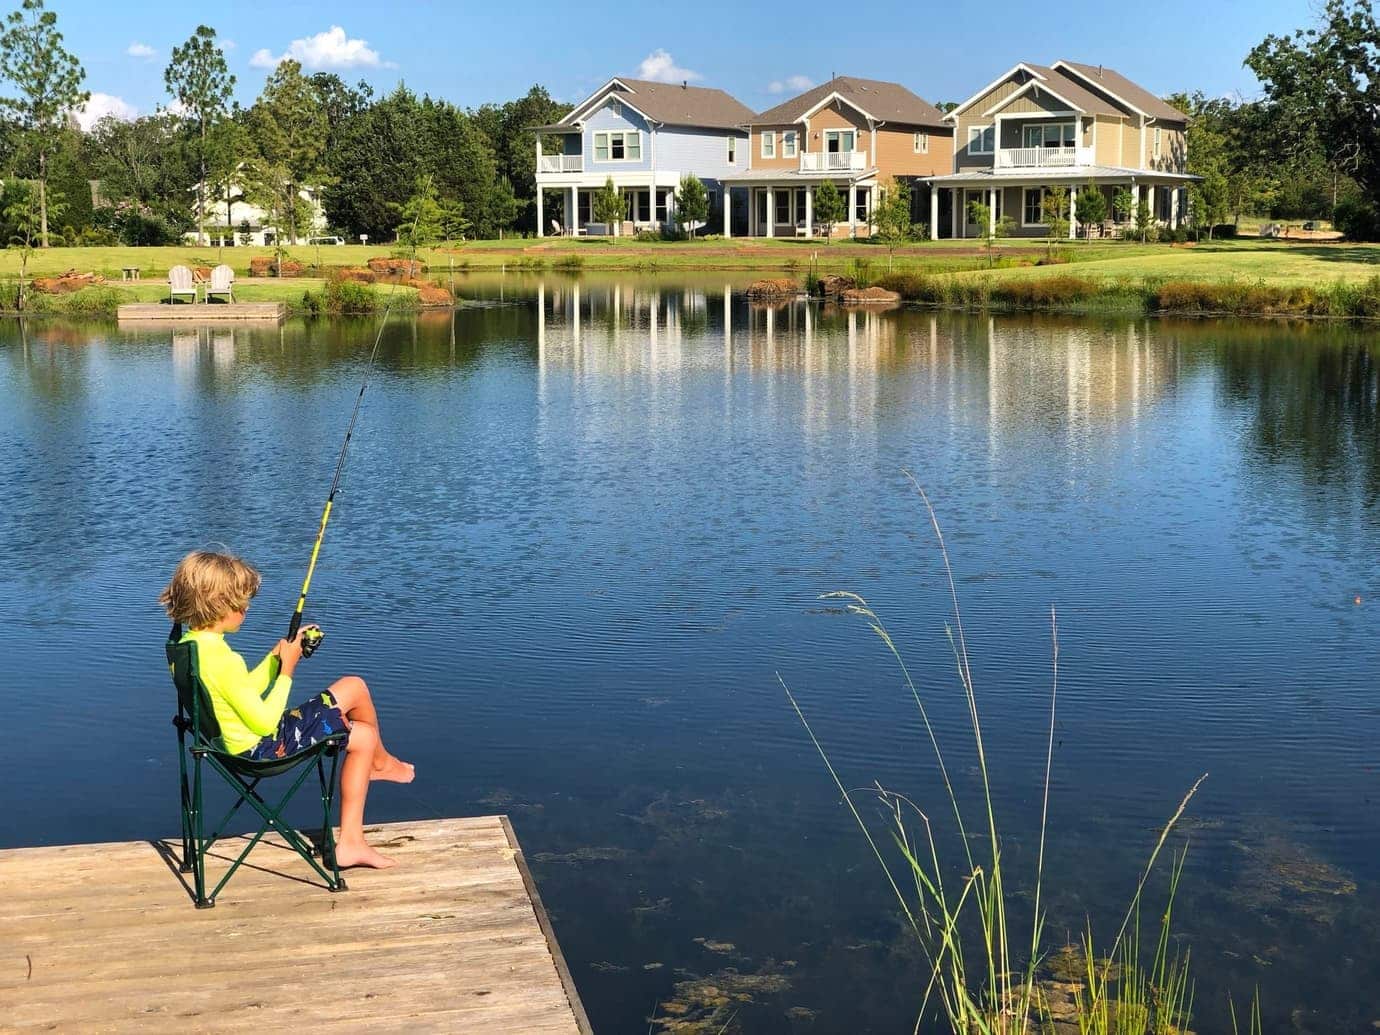 So many ways to play at Long Cove like this kid fishing on the lake